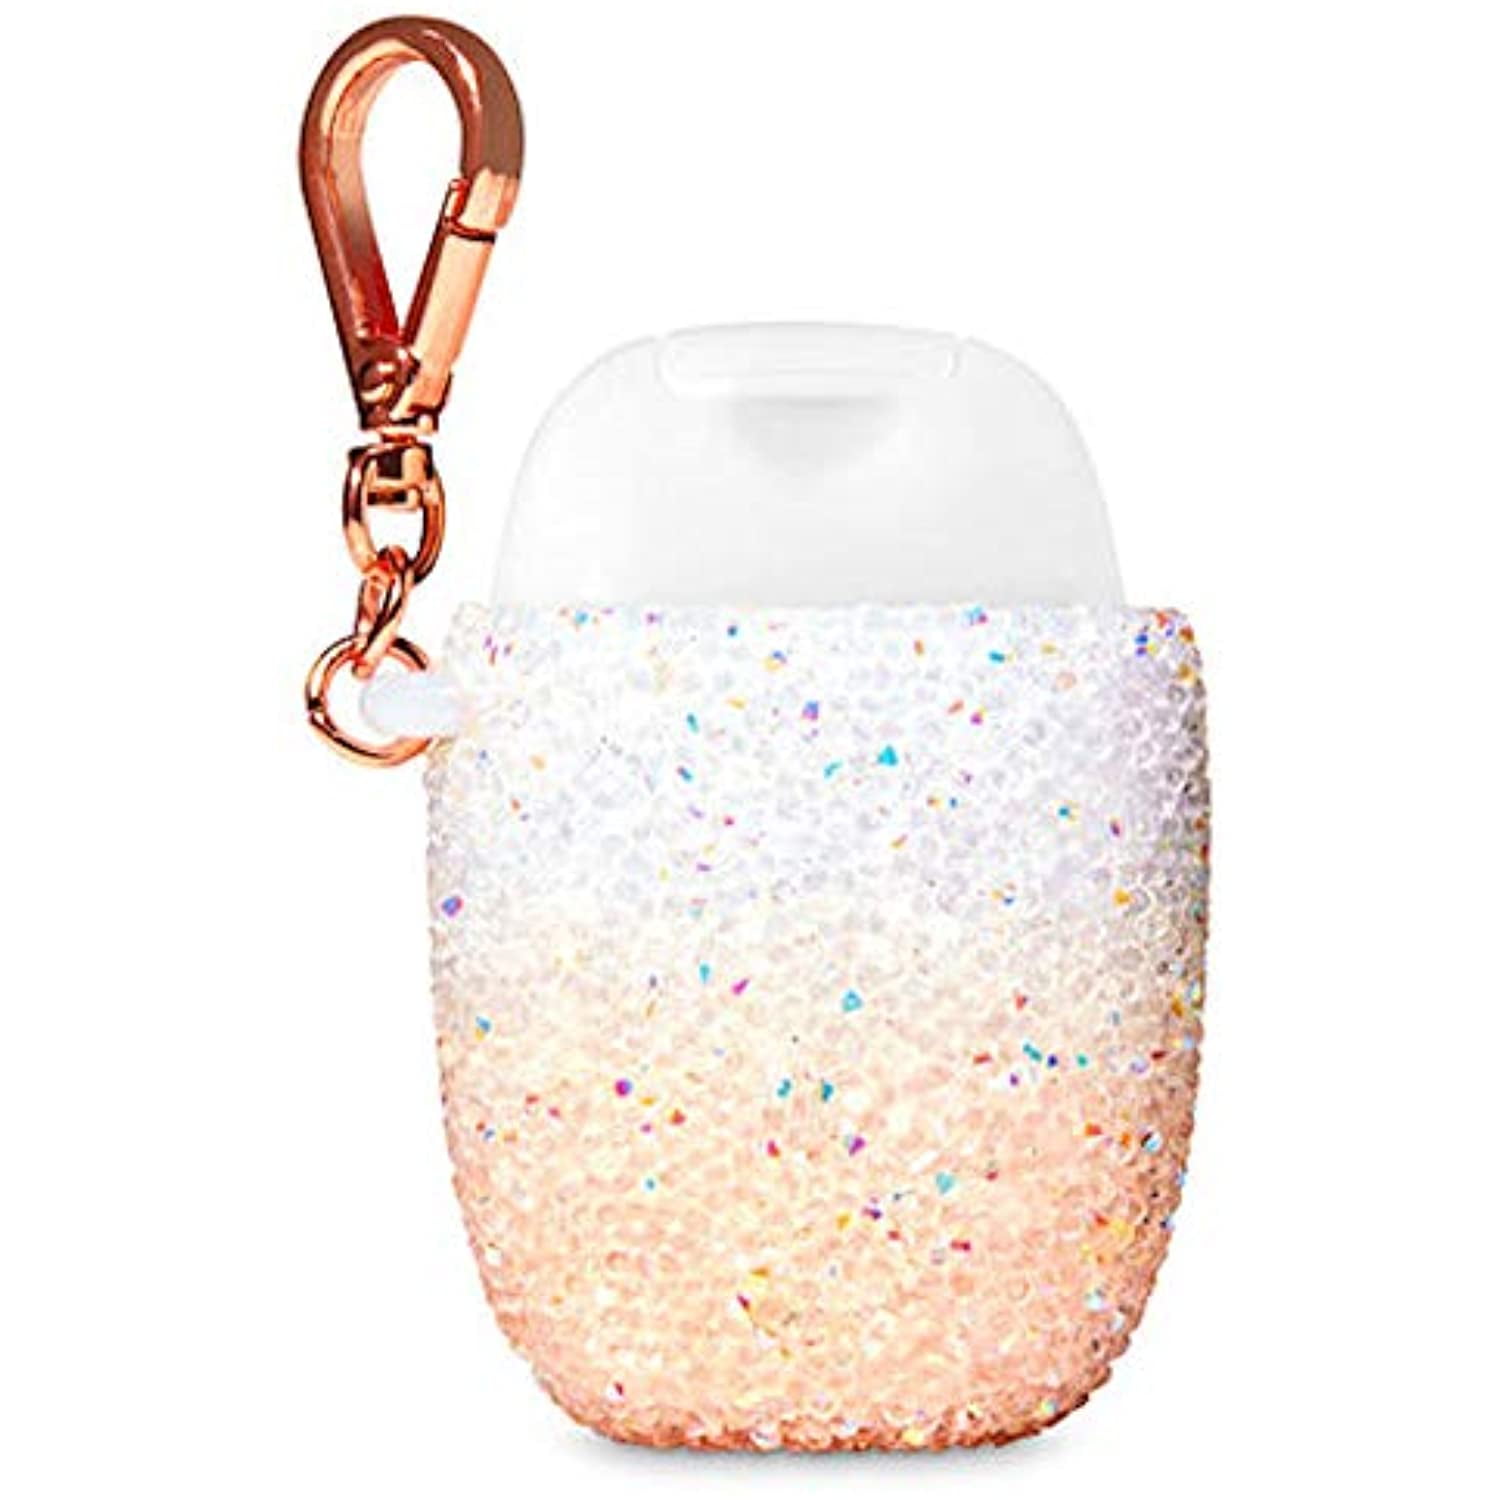 Hand Sanitizer Holder Compatible w/Bath and Body Works Hand Sanitizer- Many  Styles! (Peach White Ombre) - Walmart.com